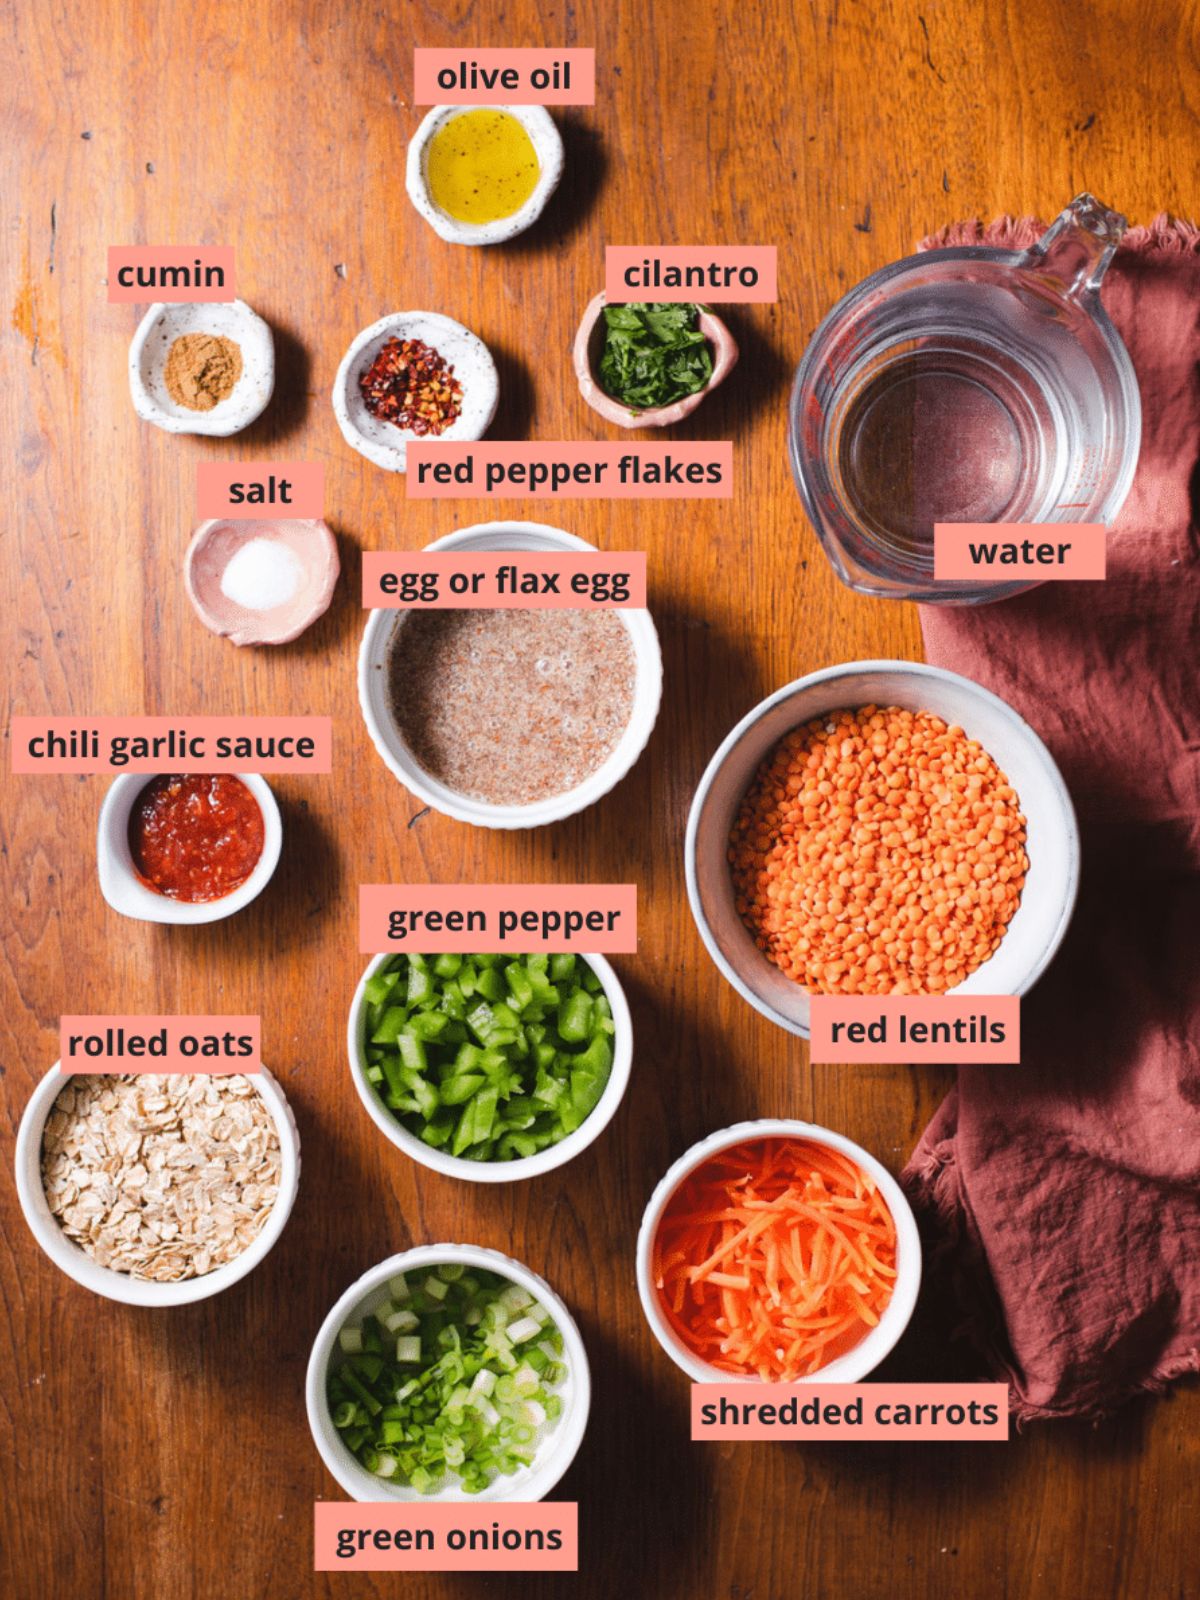 Labeled ingredients used to make red lentil burgers.